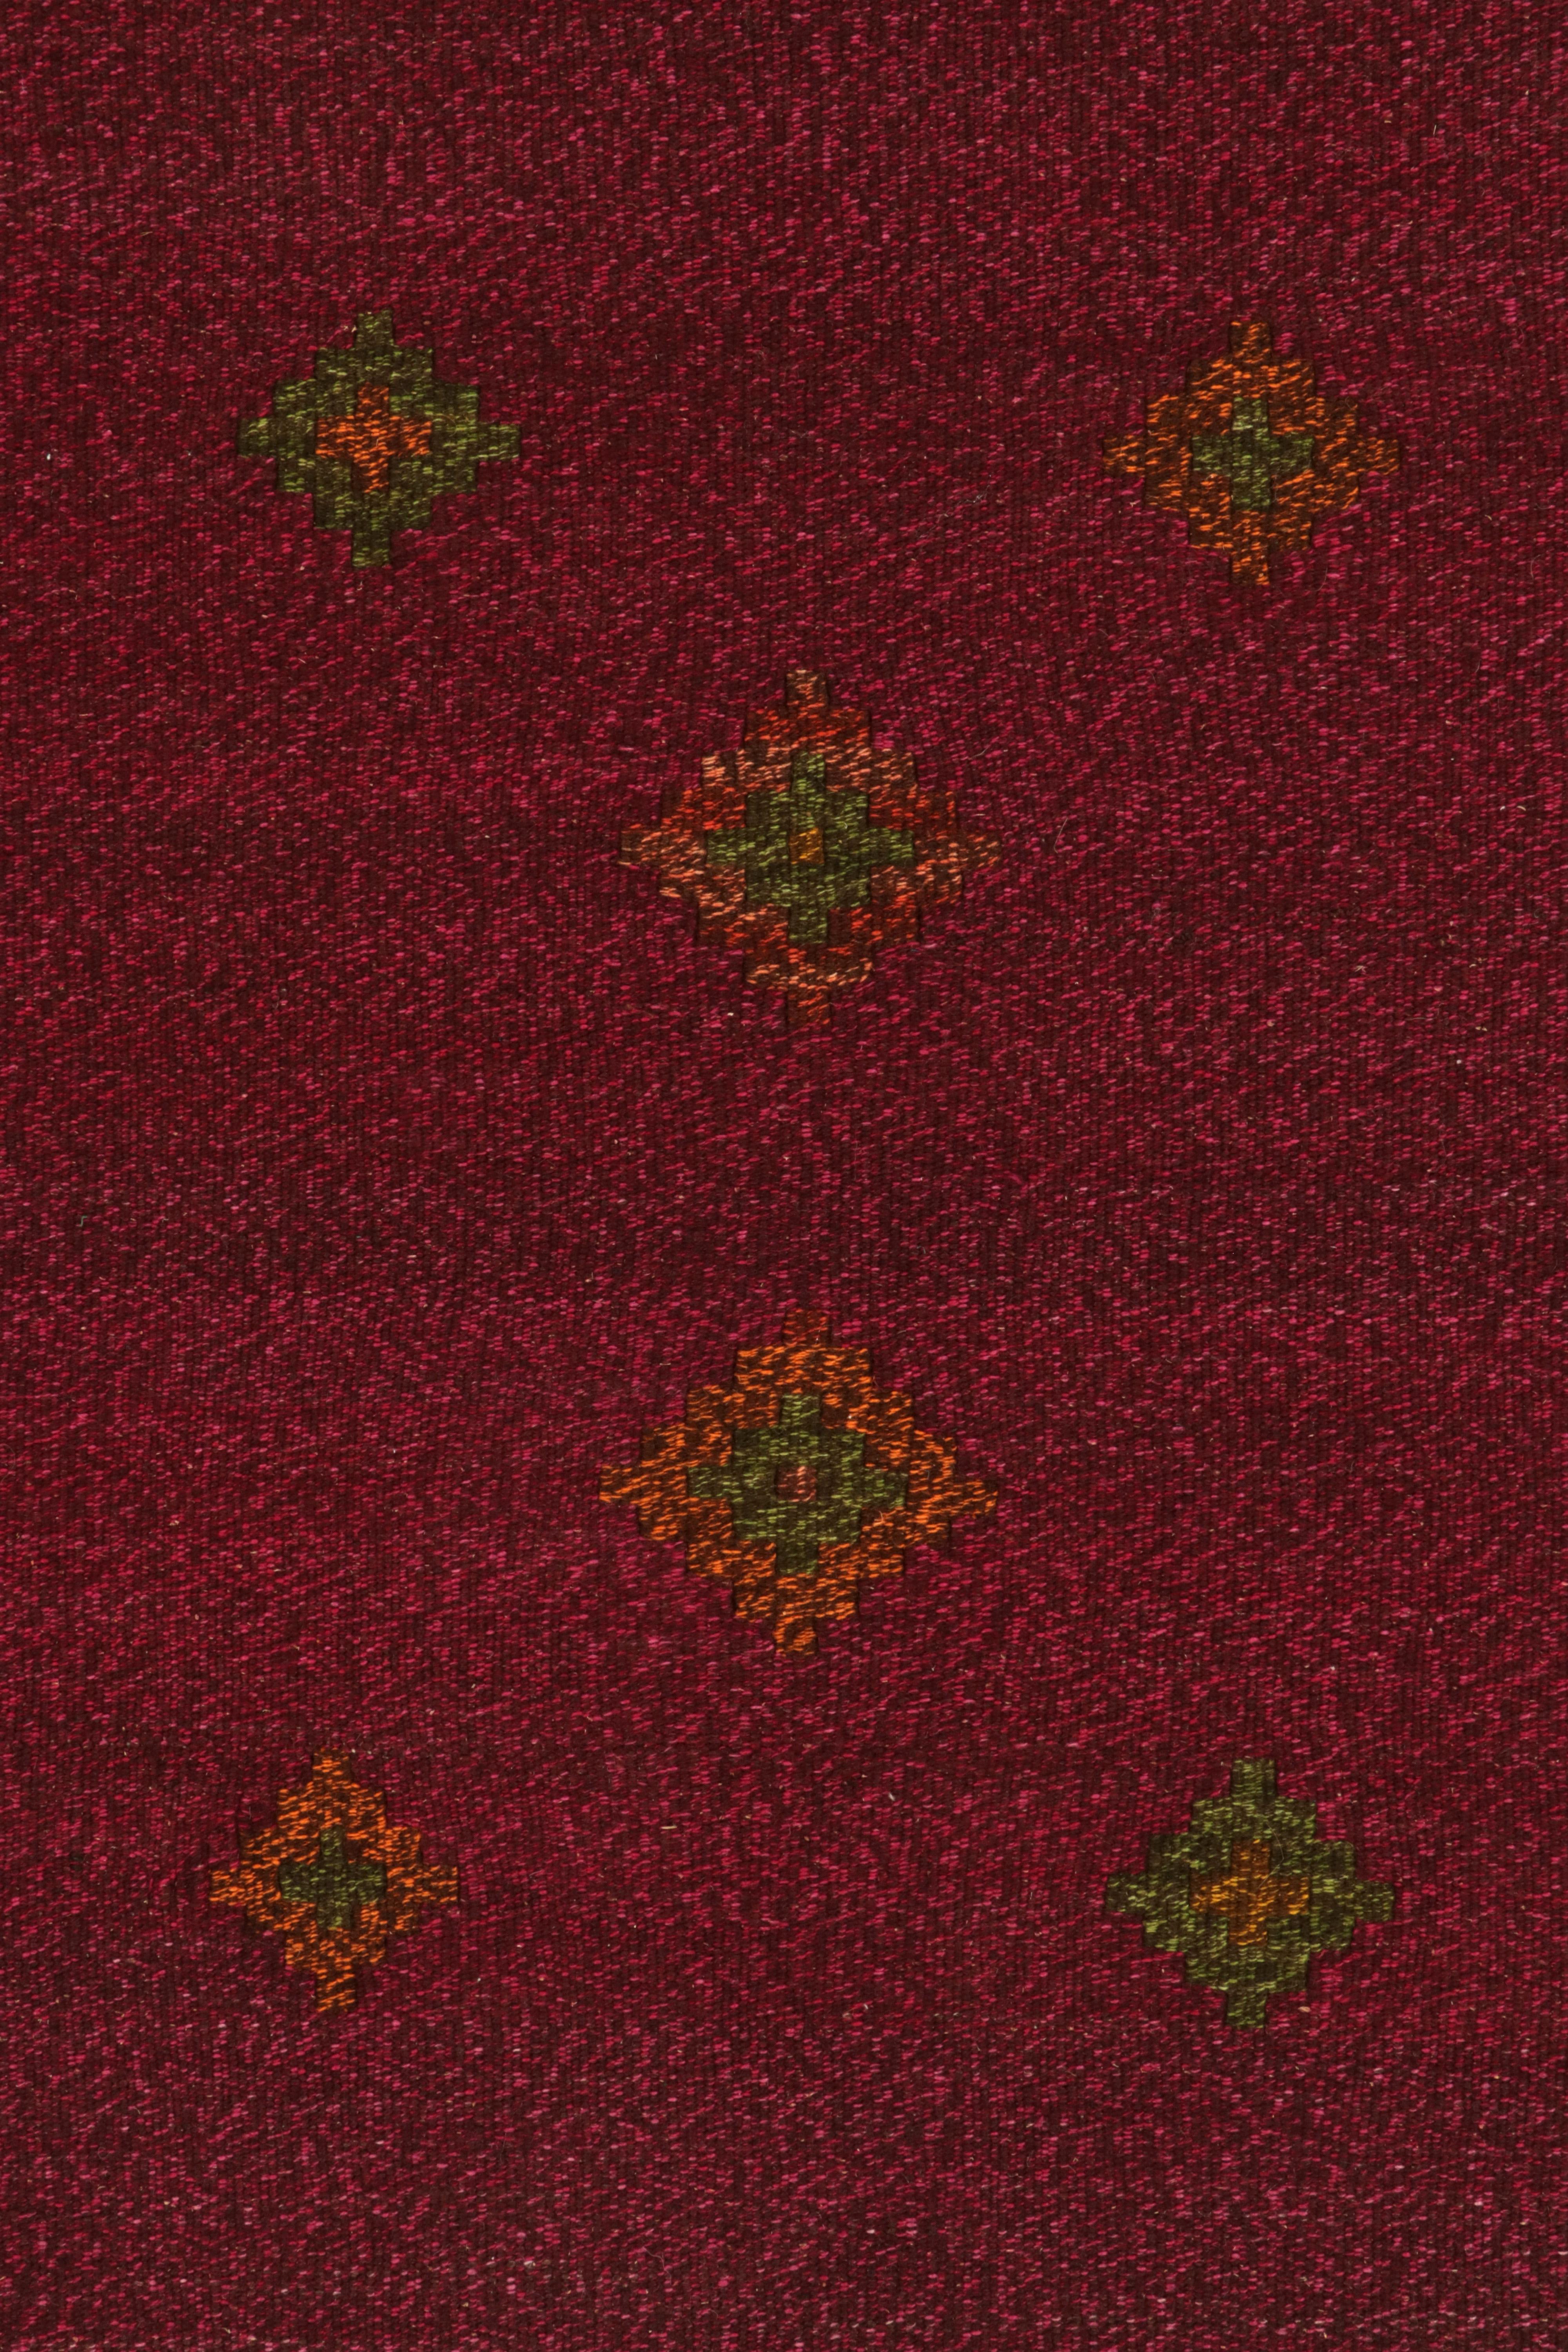 Hand-Knotted 1980s Vintage Sofreh Kilim Rug in Maroon, Green Geometric Pattern by Rug & Kilim For Sale